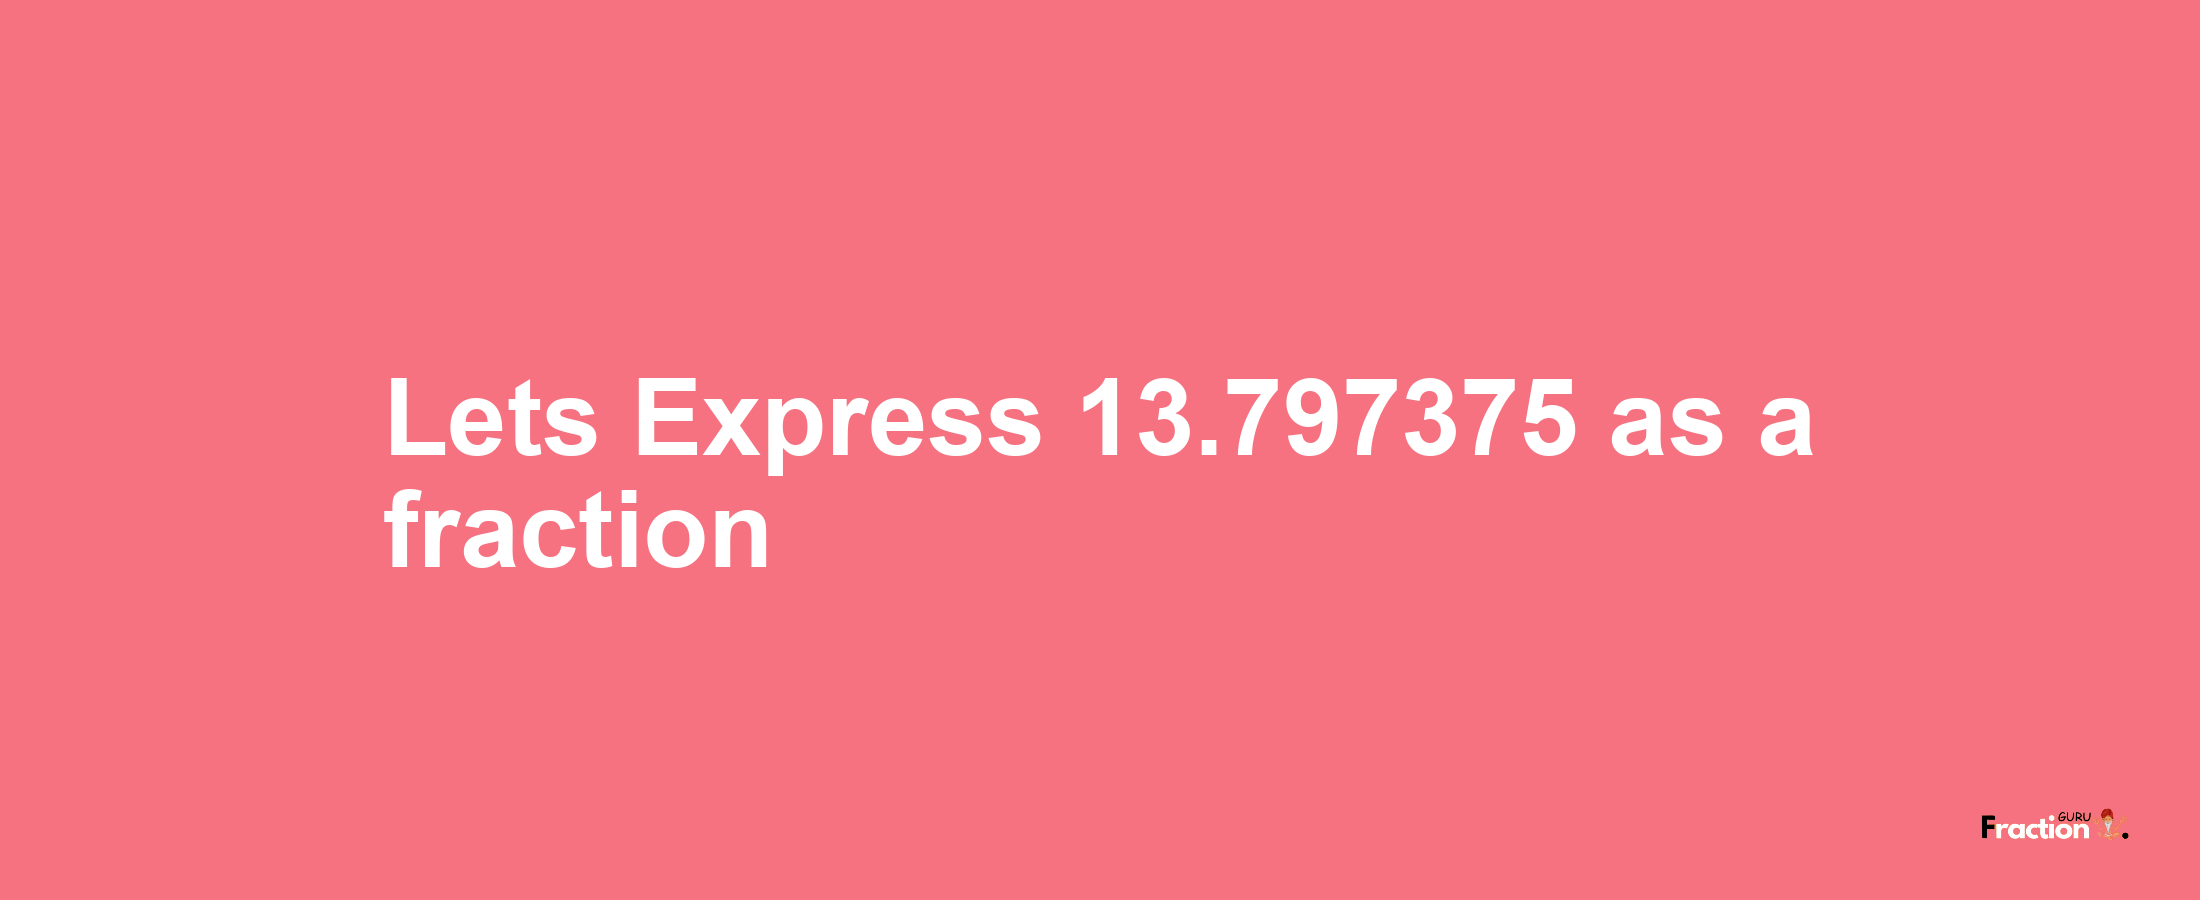 Lets Express 13.797375 as afraction